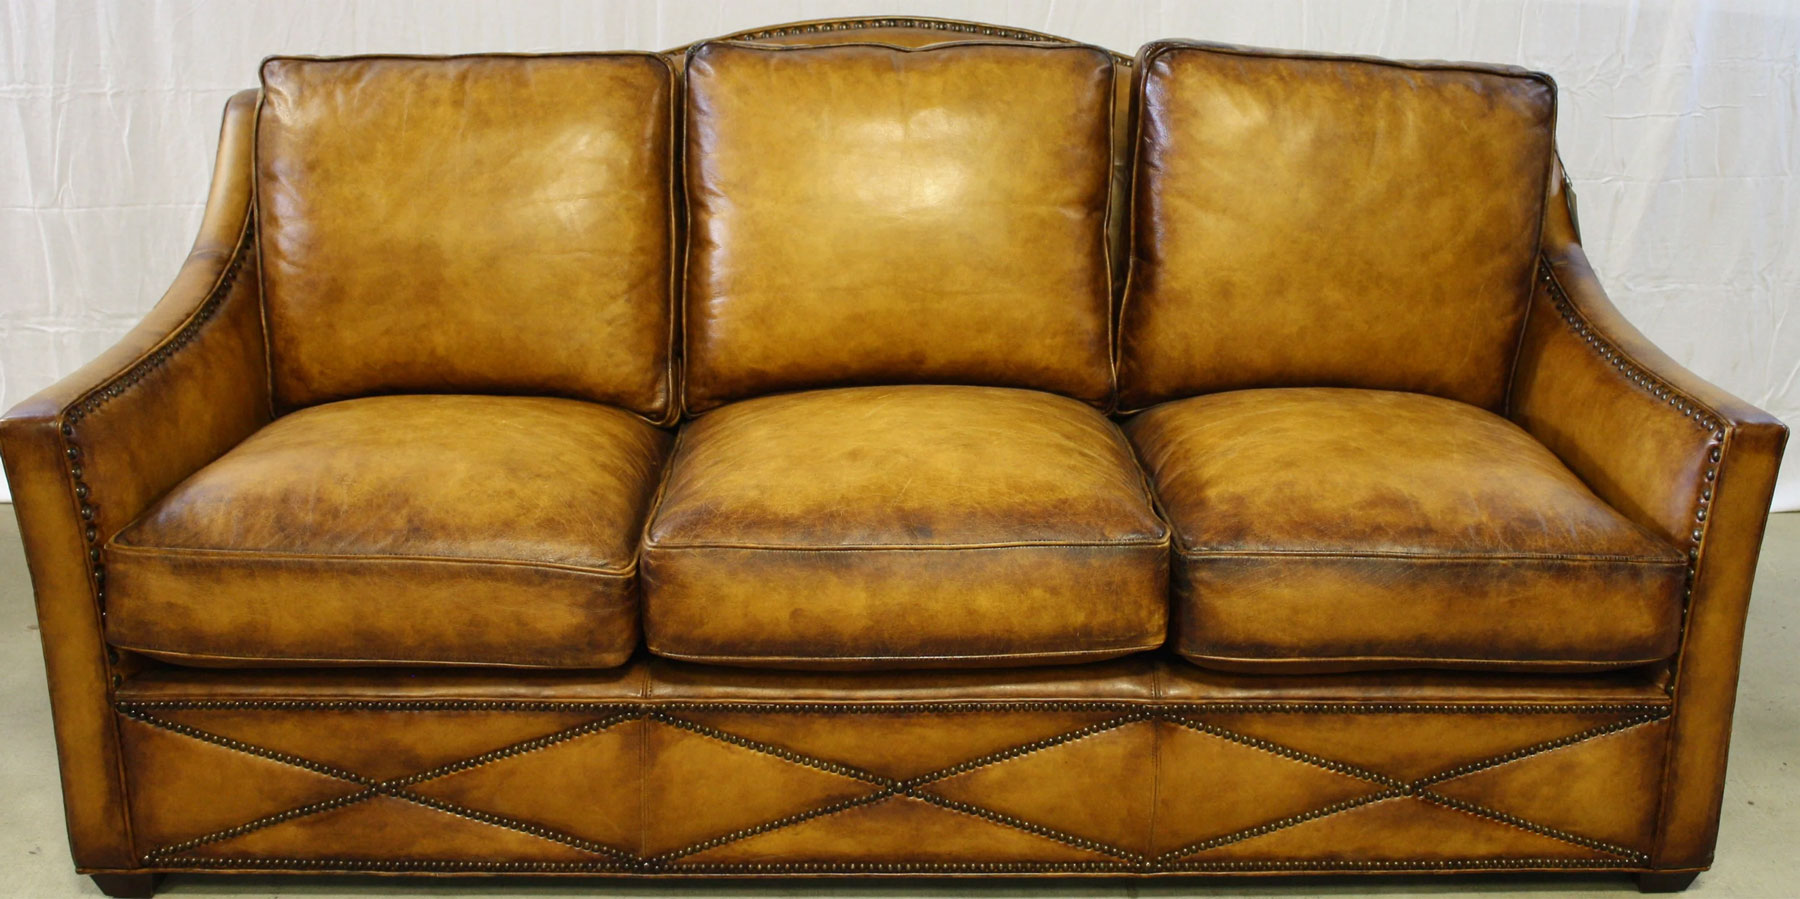 Our House 542-83 Sofa in Whiskey Barrel Hand Rubbed Leather